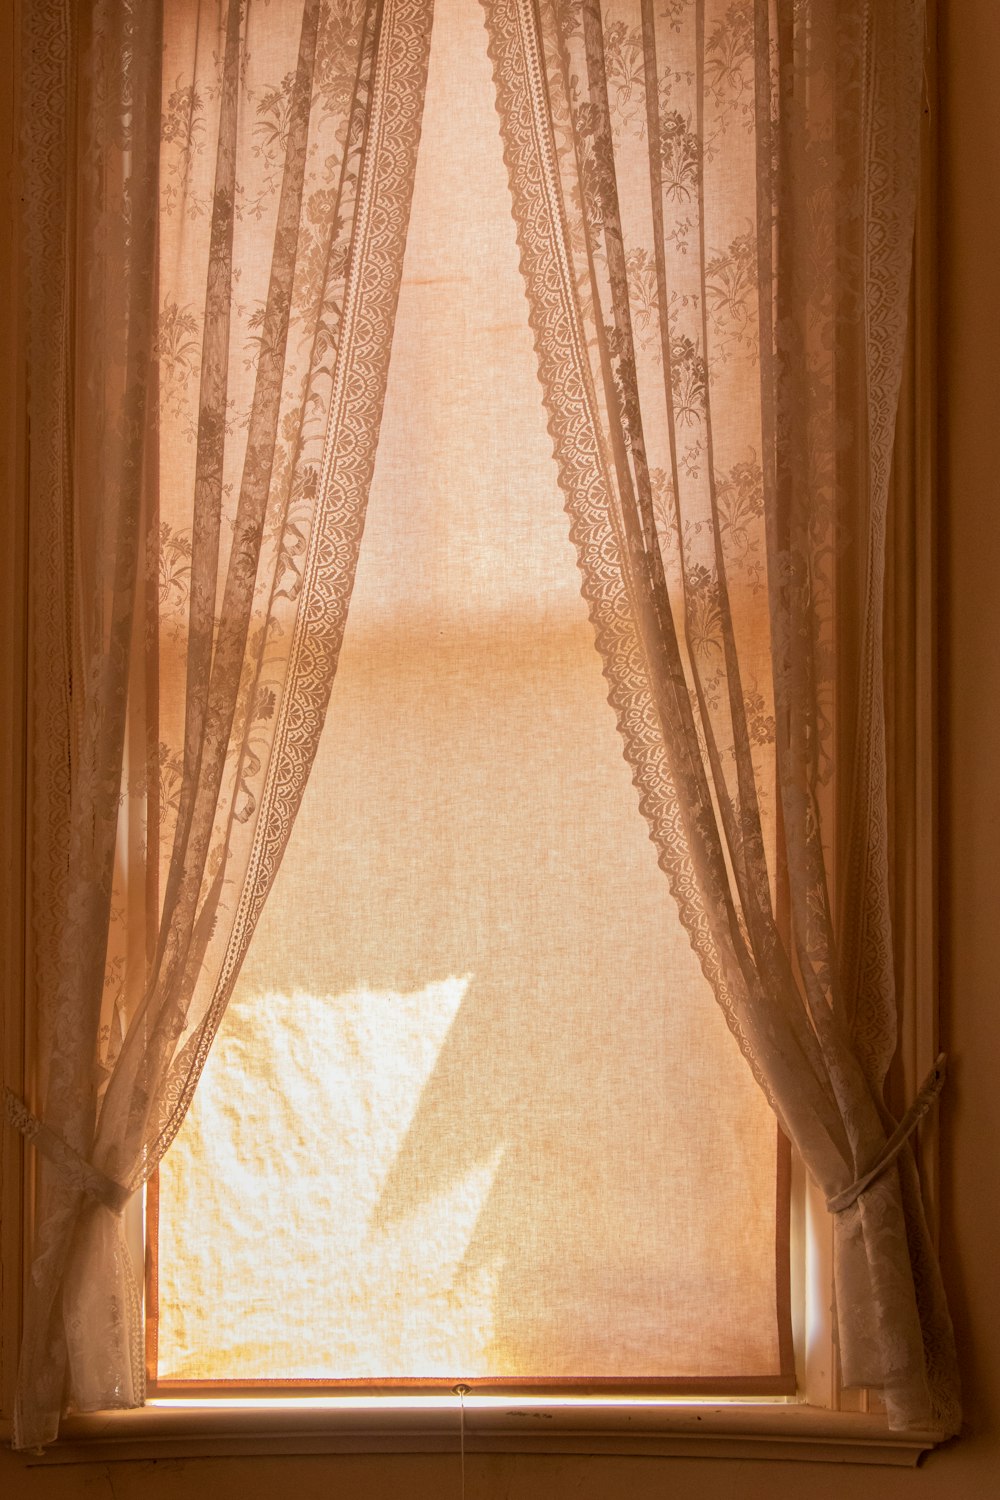 brown floral window curtain photo – Free Melbourne vic Image on Unsplash